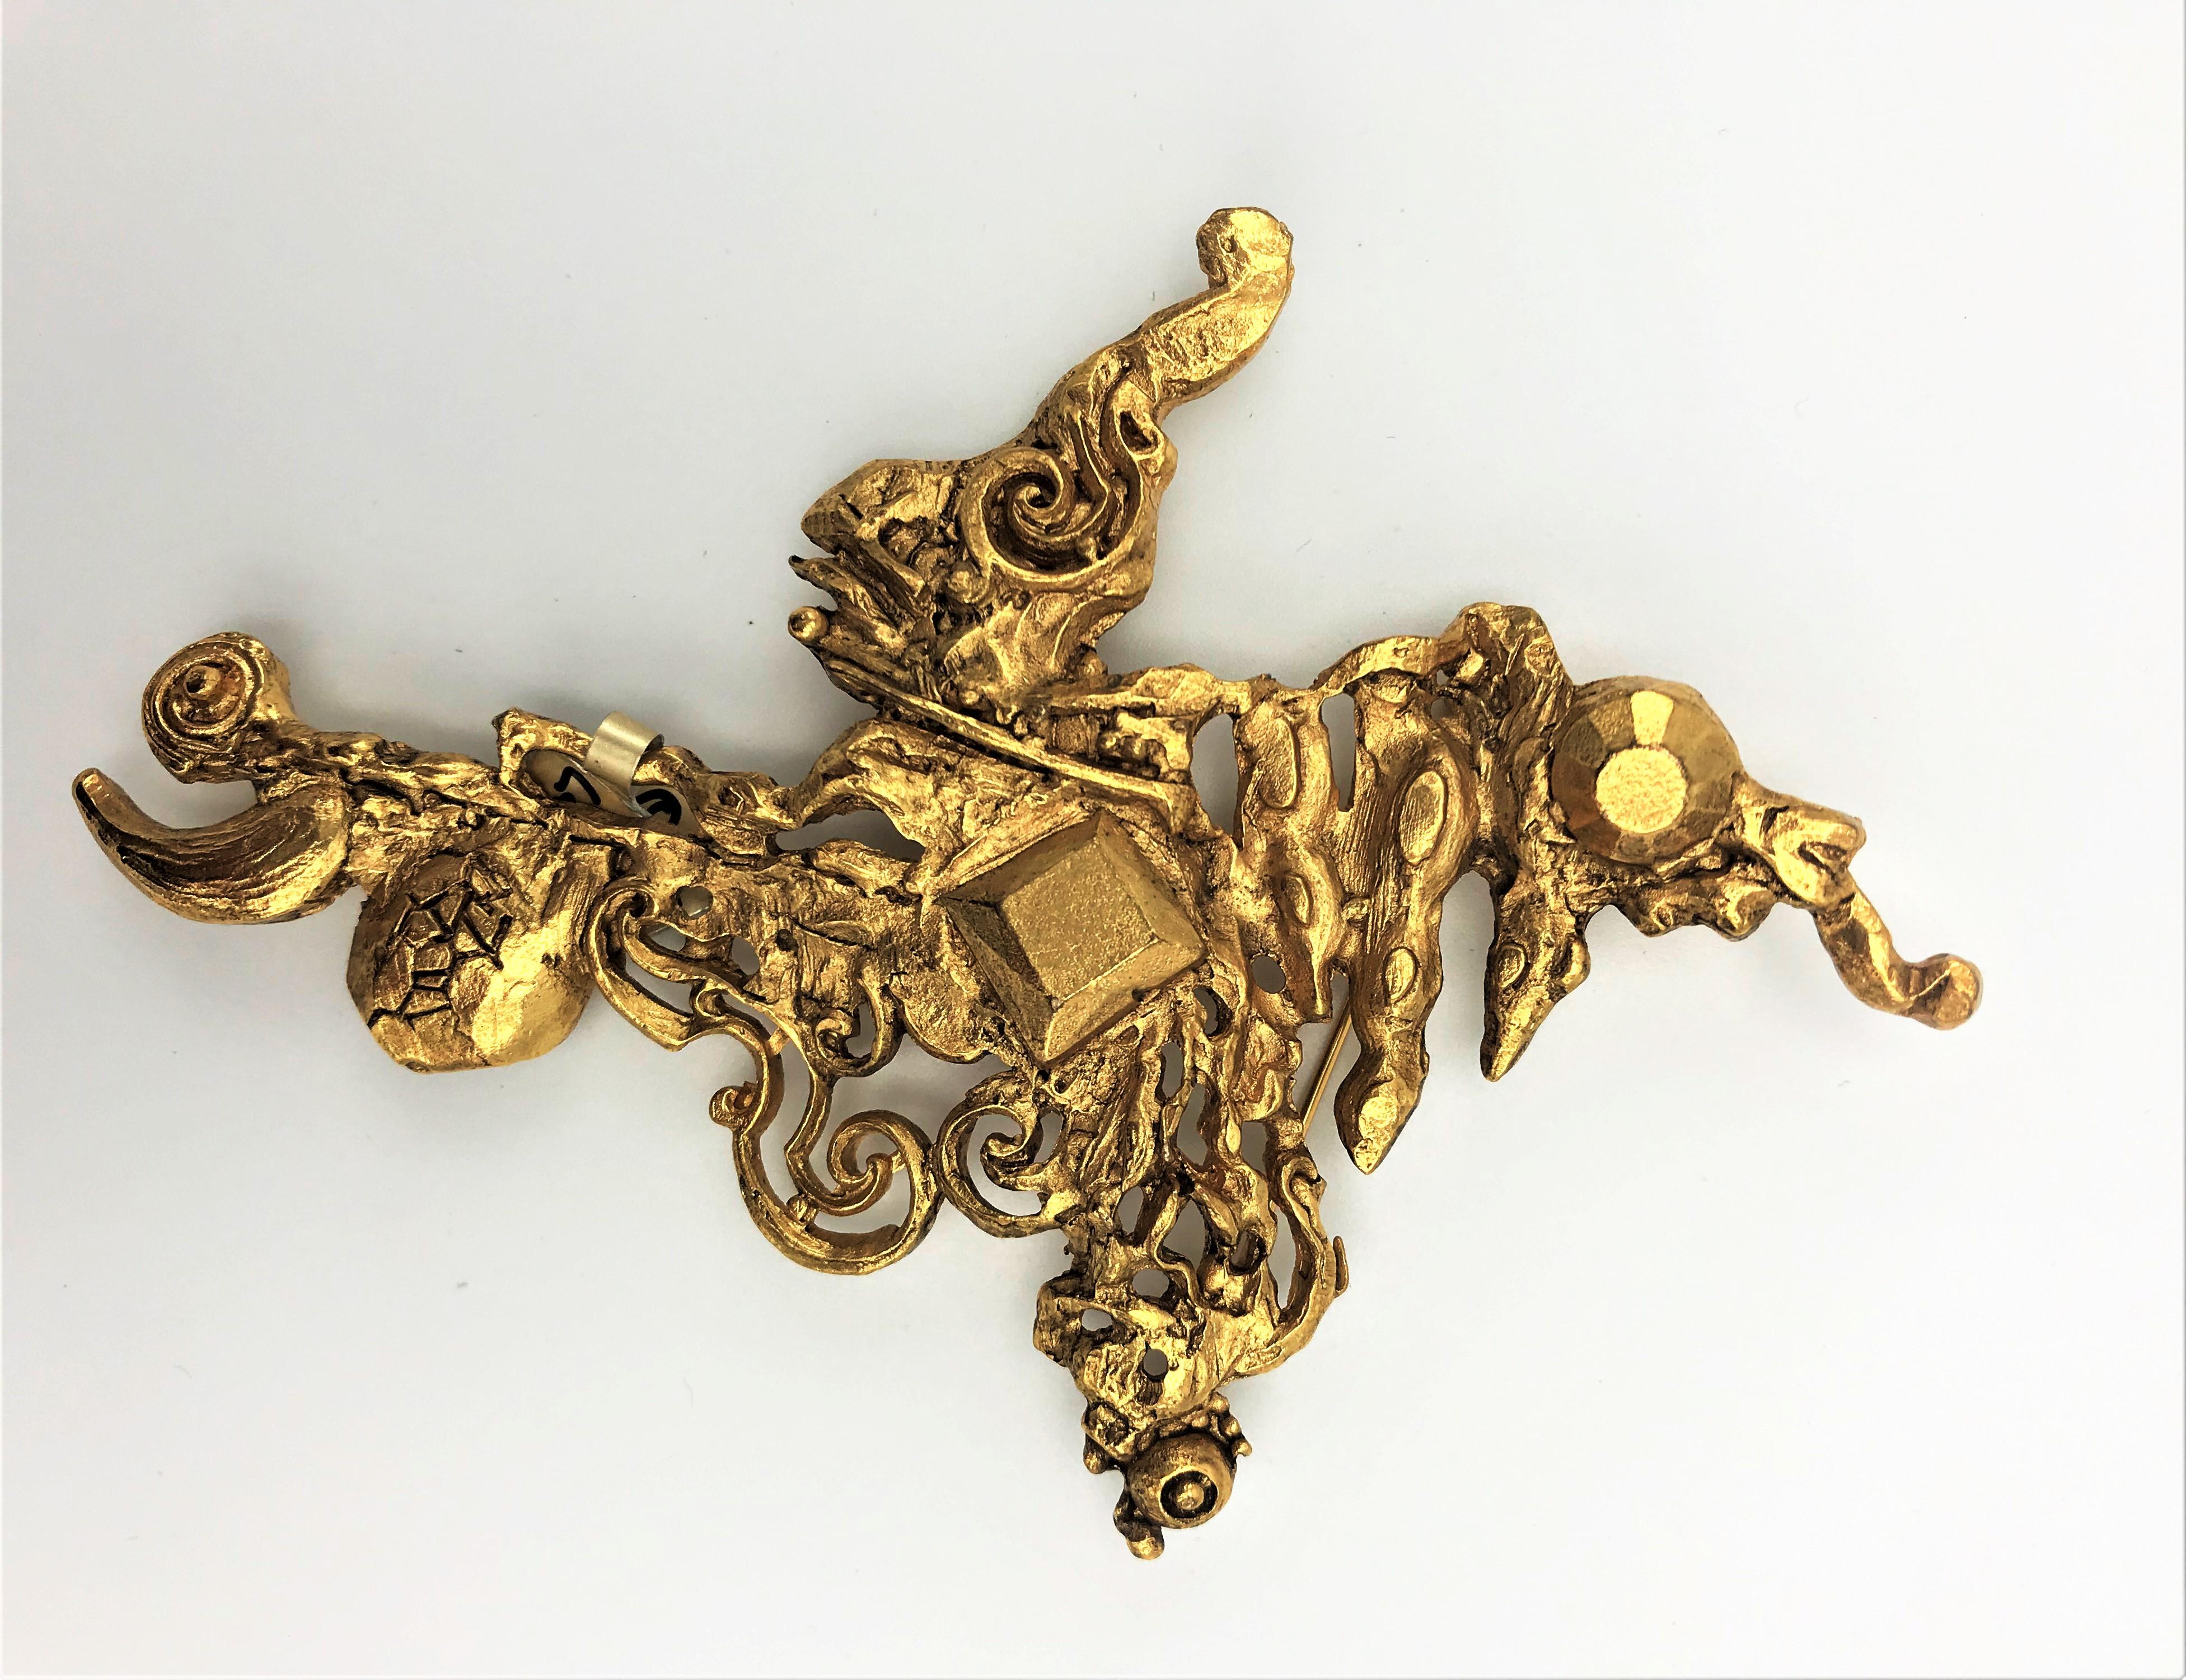  Christian Lacroix Paris stylized cross brooch gold plated 1980s In Excellent Condition For Sale In Stuttgart, DE